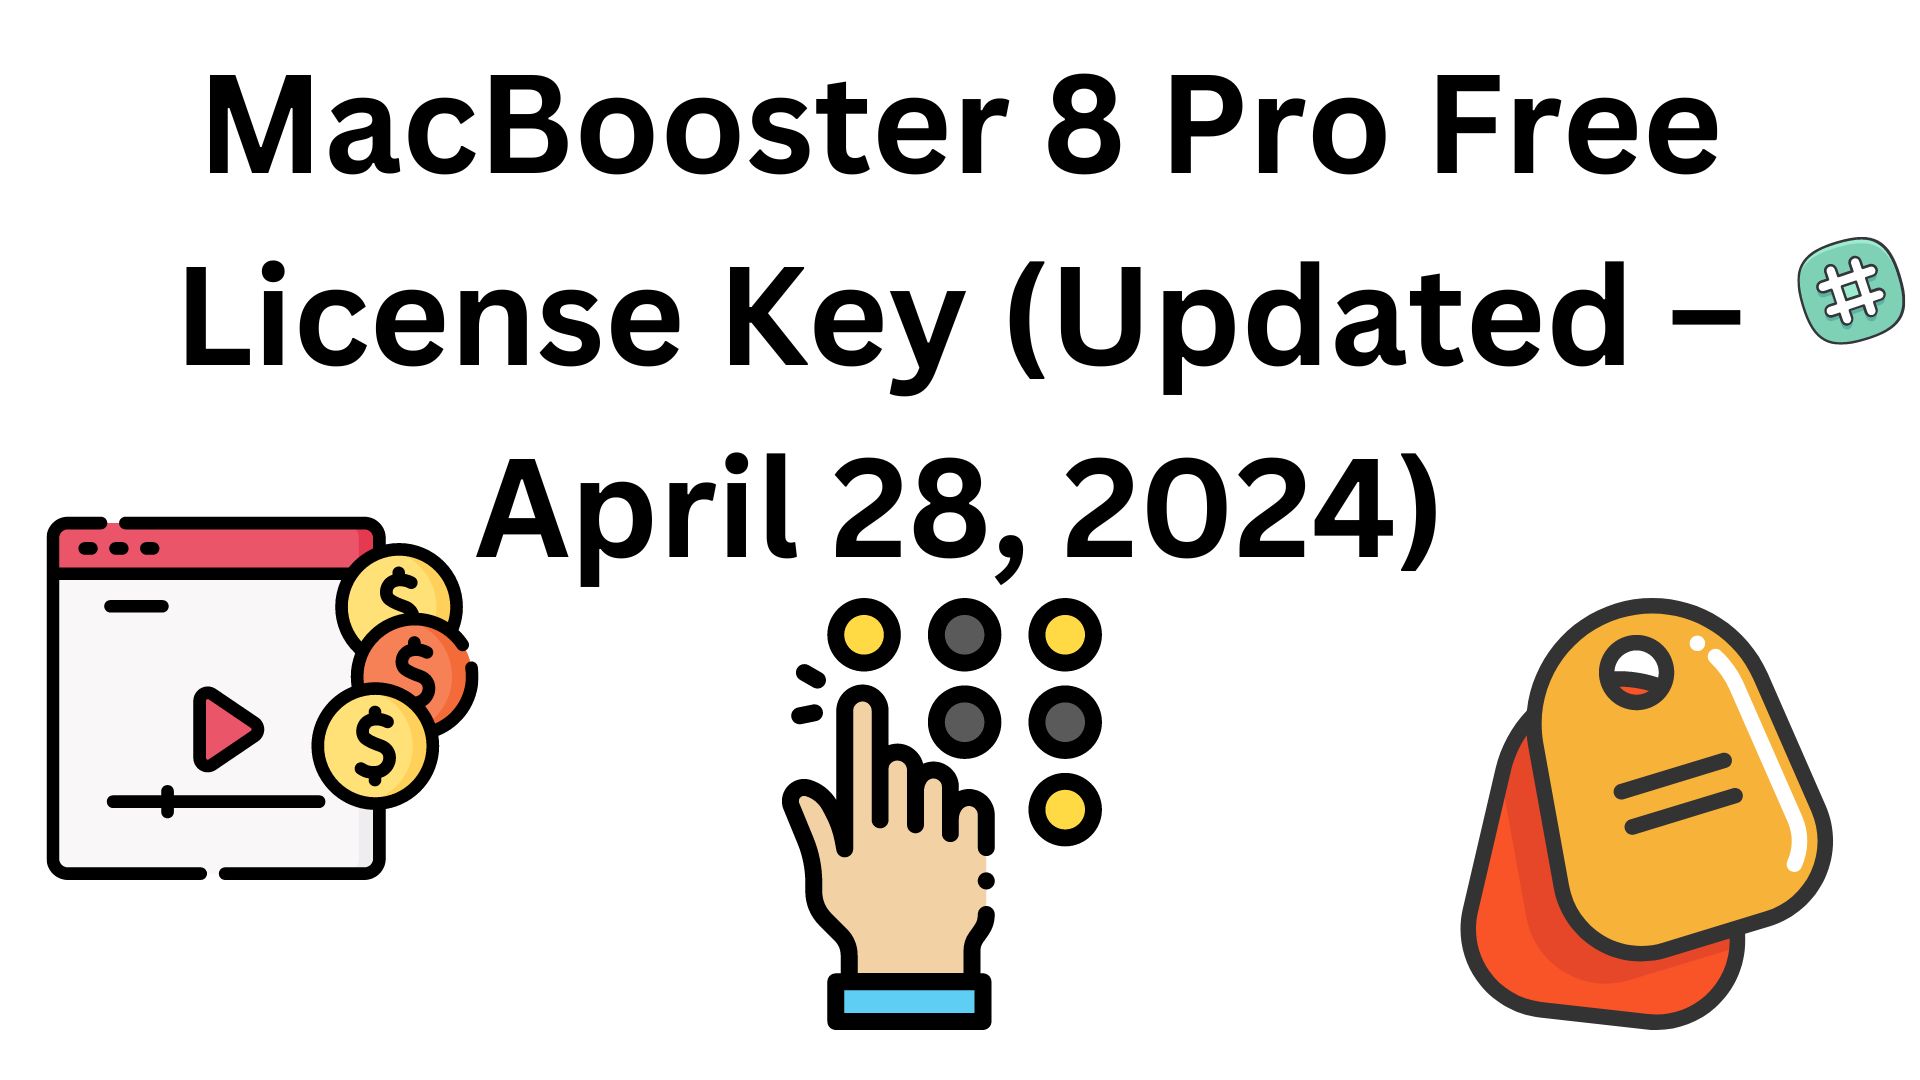 Macbooster 8 Pro Free License Key (Updated – April 28, 2024)